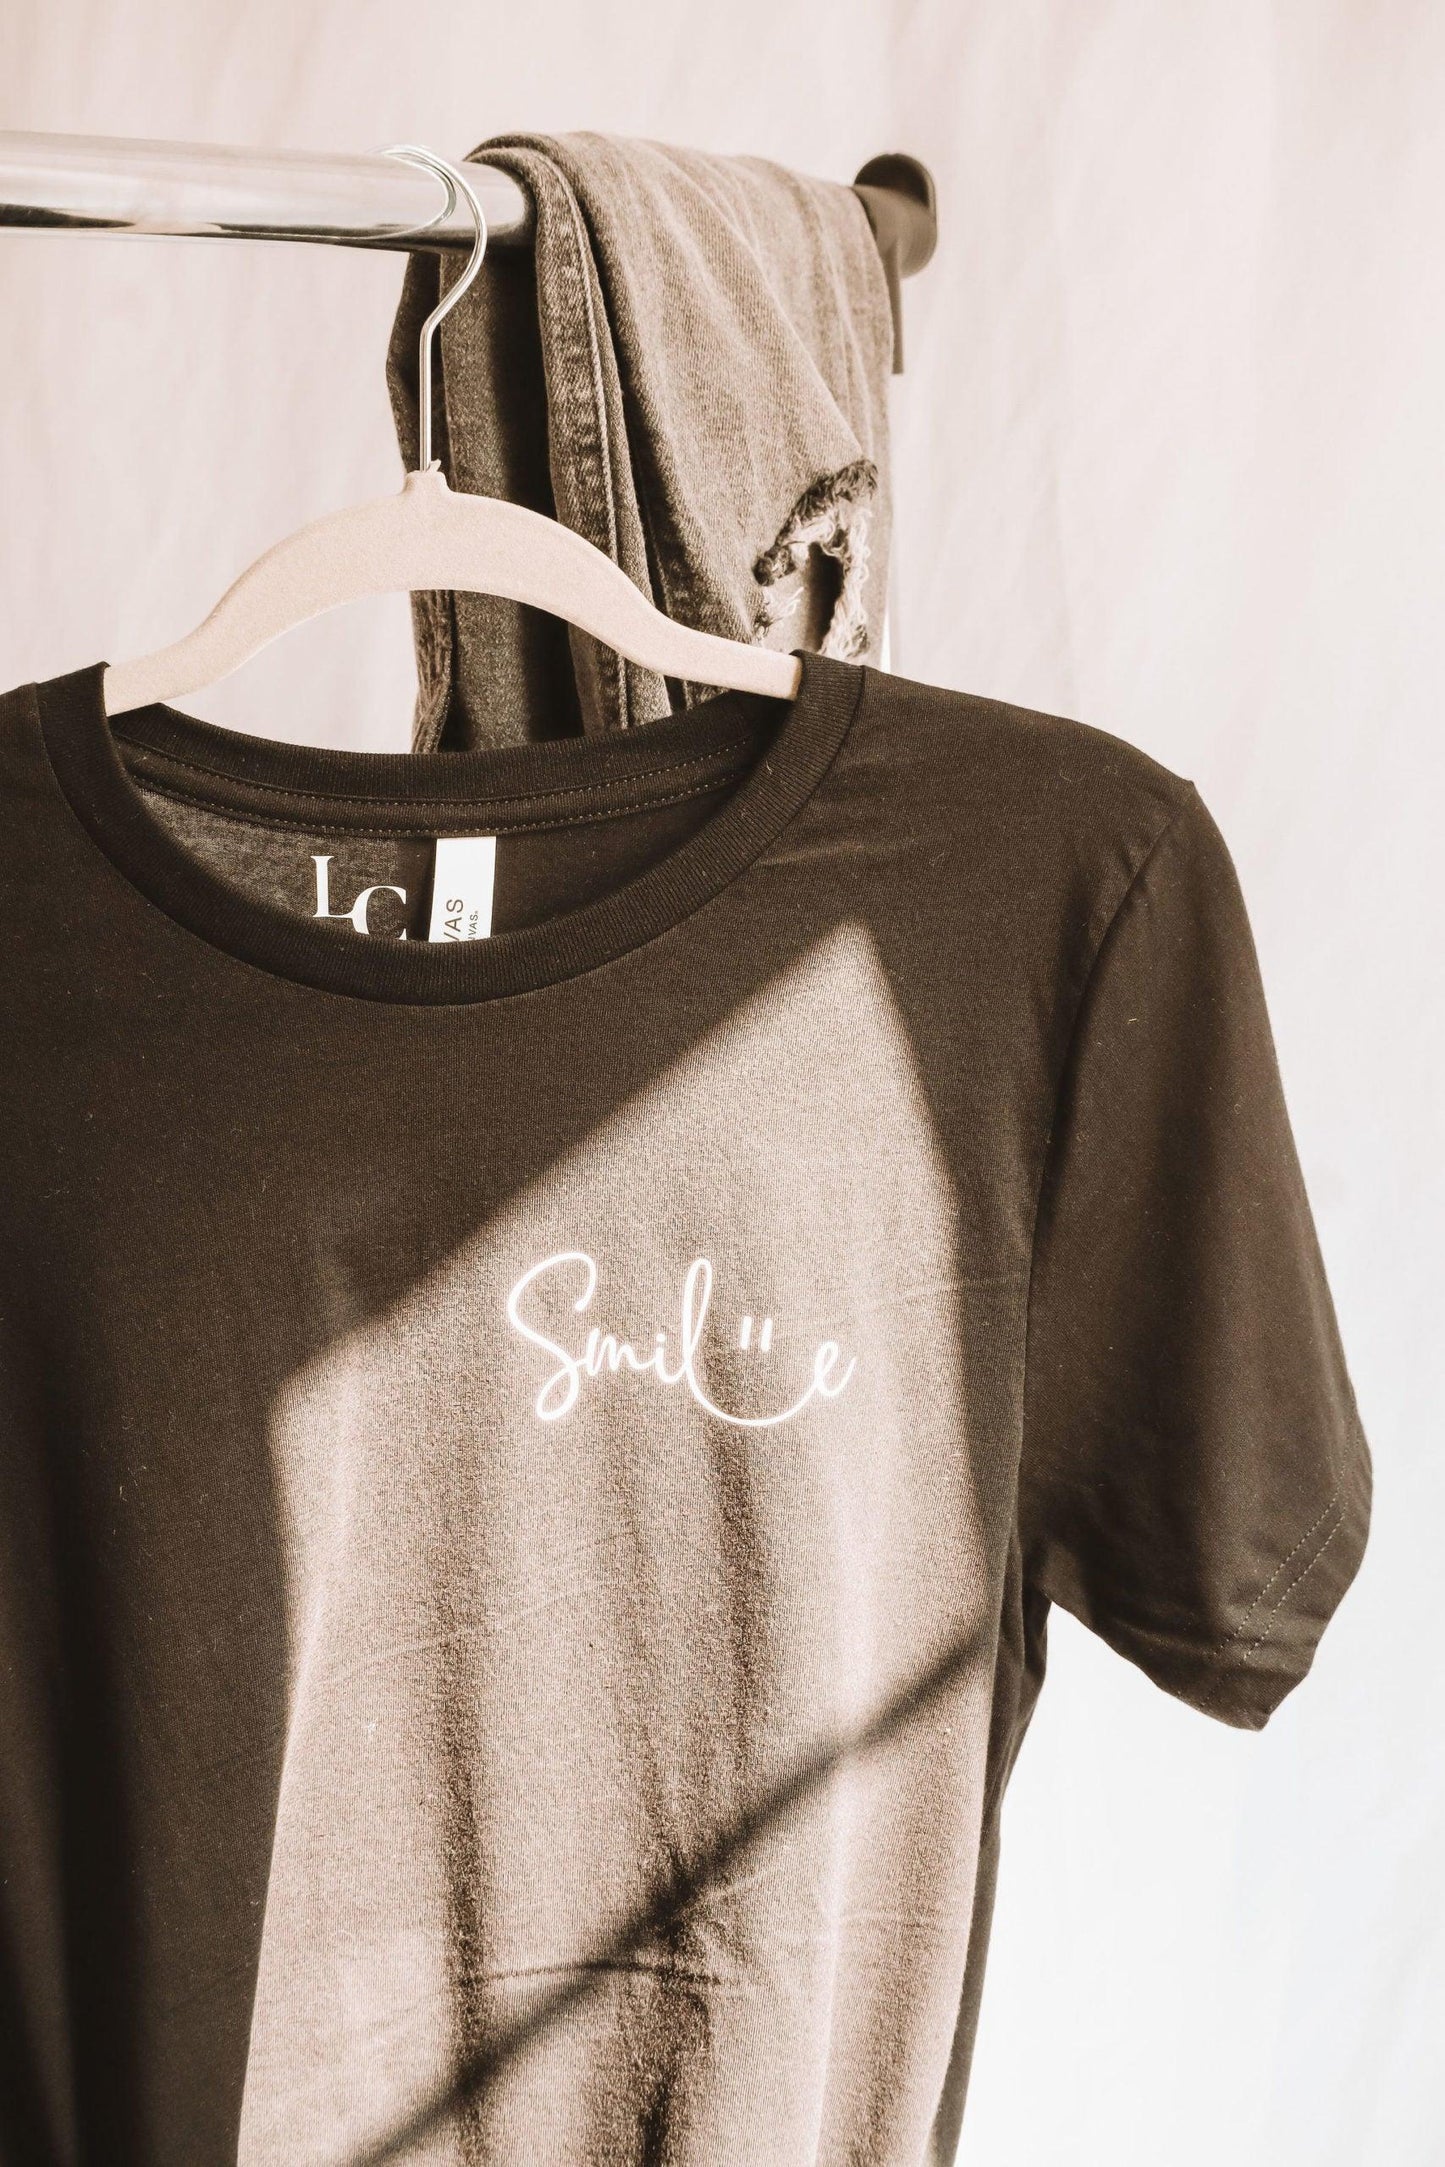 A black short sleeve T-shirt hanging on a clothing rack. Smile is written in a cute cursive font, with a smiley face illustrated between the connection of l and e. There is natural sunlight illuminating the design.